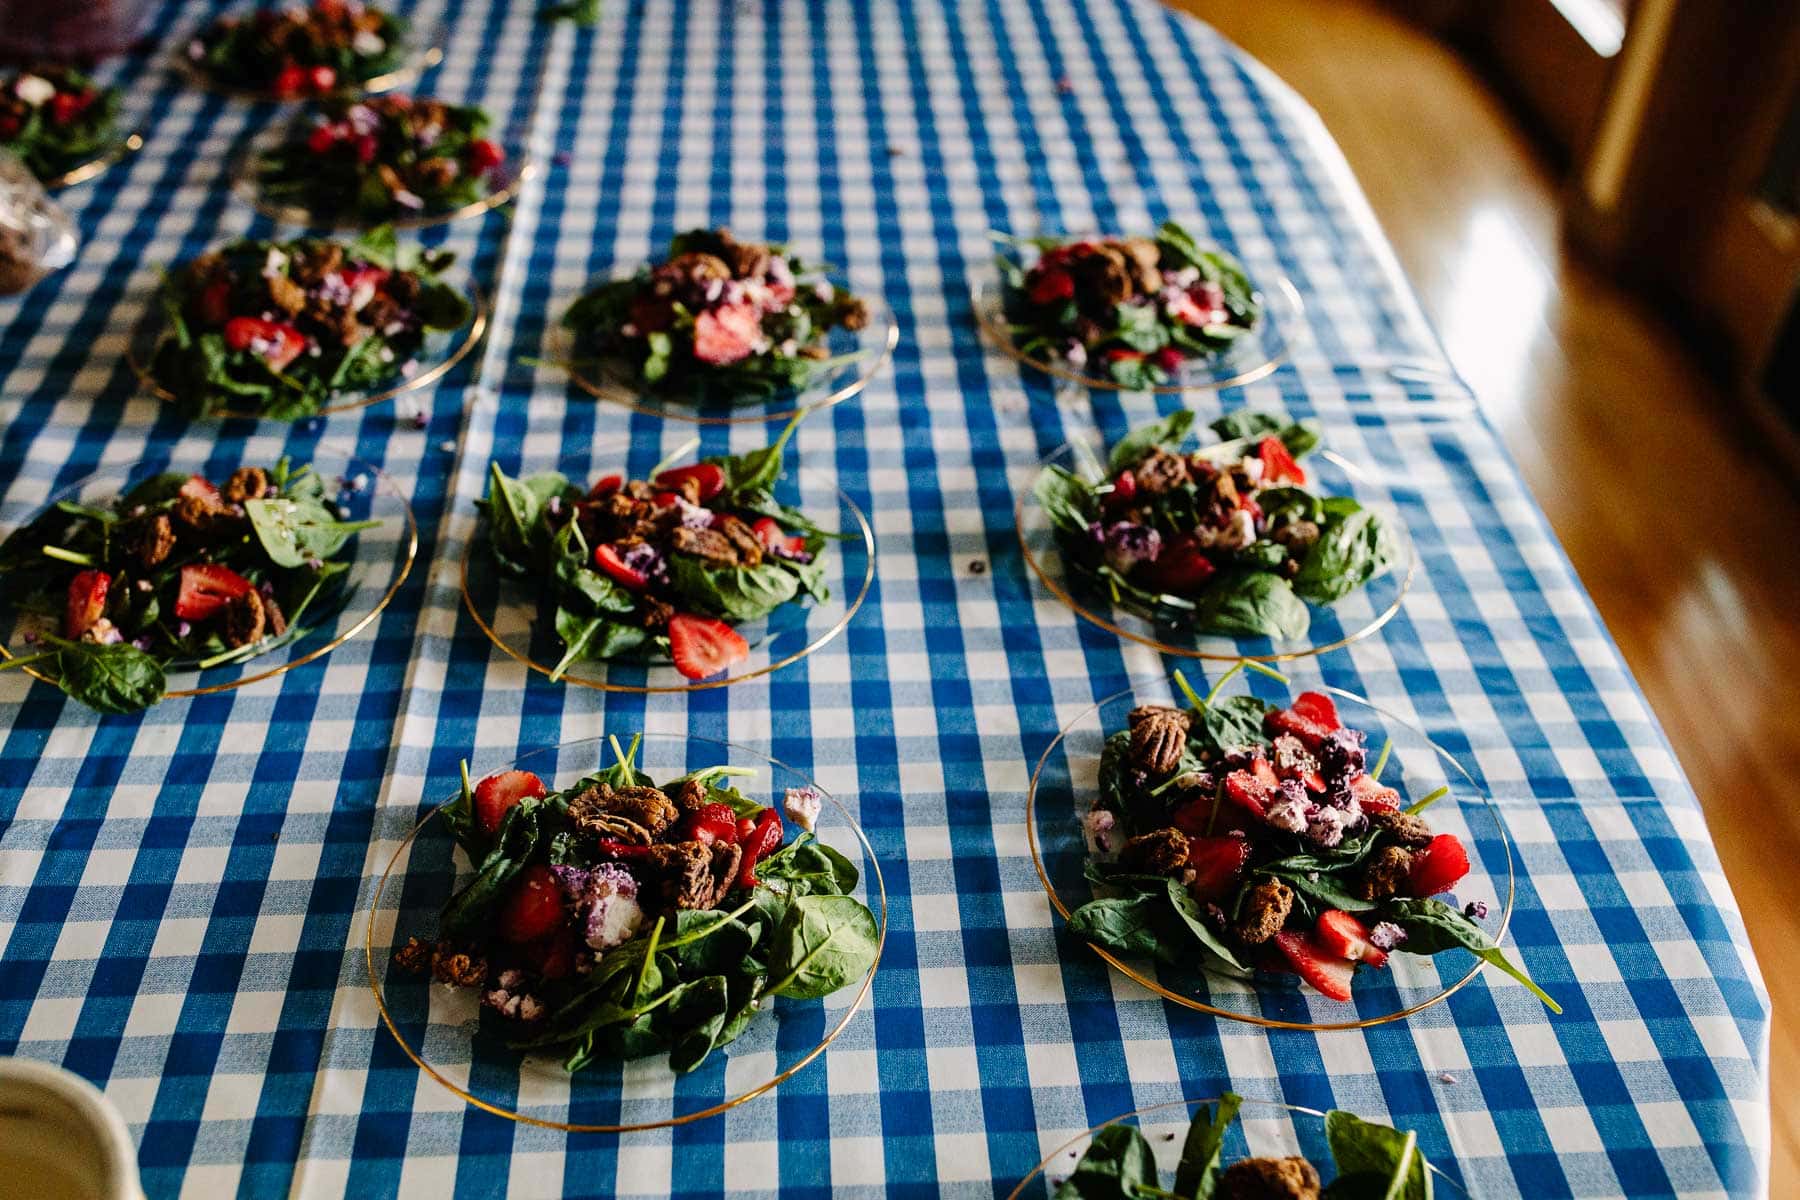 salads on blue gingham tablecloth